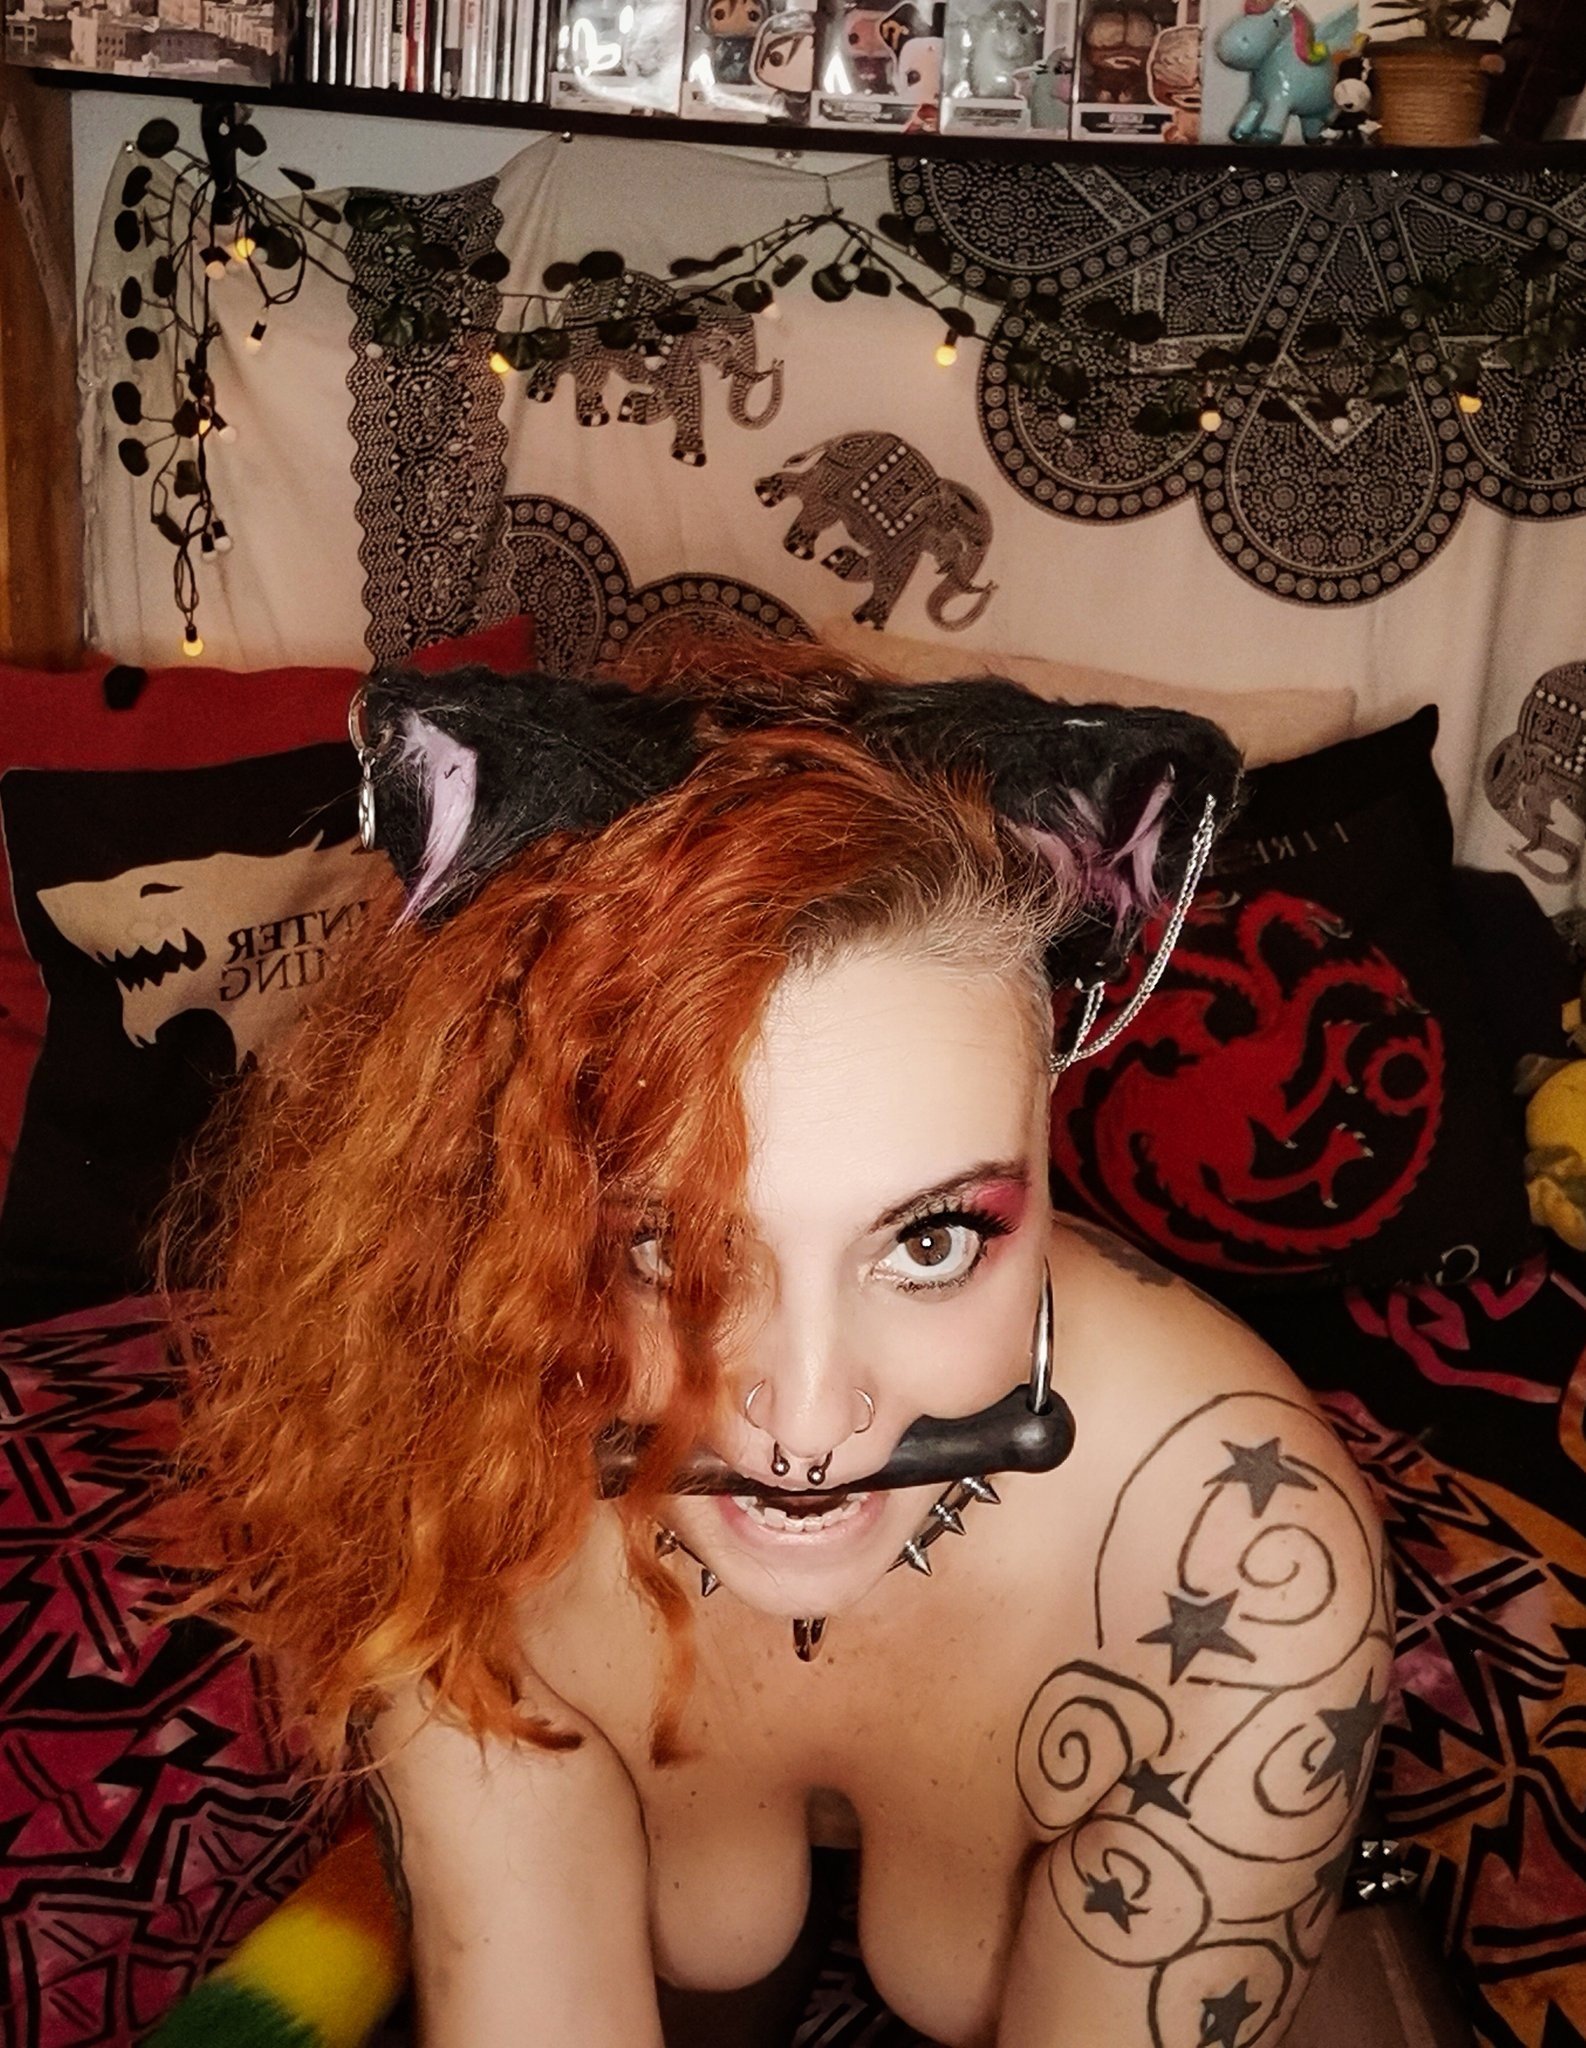 Photo by Nekotied with the username @nekotied, who is a star user,  September 26, 2020 at 11:53 PM. The post is about the topic Bondage, Drool, Gagg, Slaves, Stockings, Fetish and the text says 'Do you ever wondered what it feels playing with a wild beast? Try to tame me. Im wandering wild on my OnlyFans. You should adopt me to start the weekend like a hero 
http://onlyfans.com/nekotied'